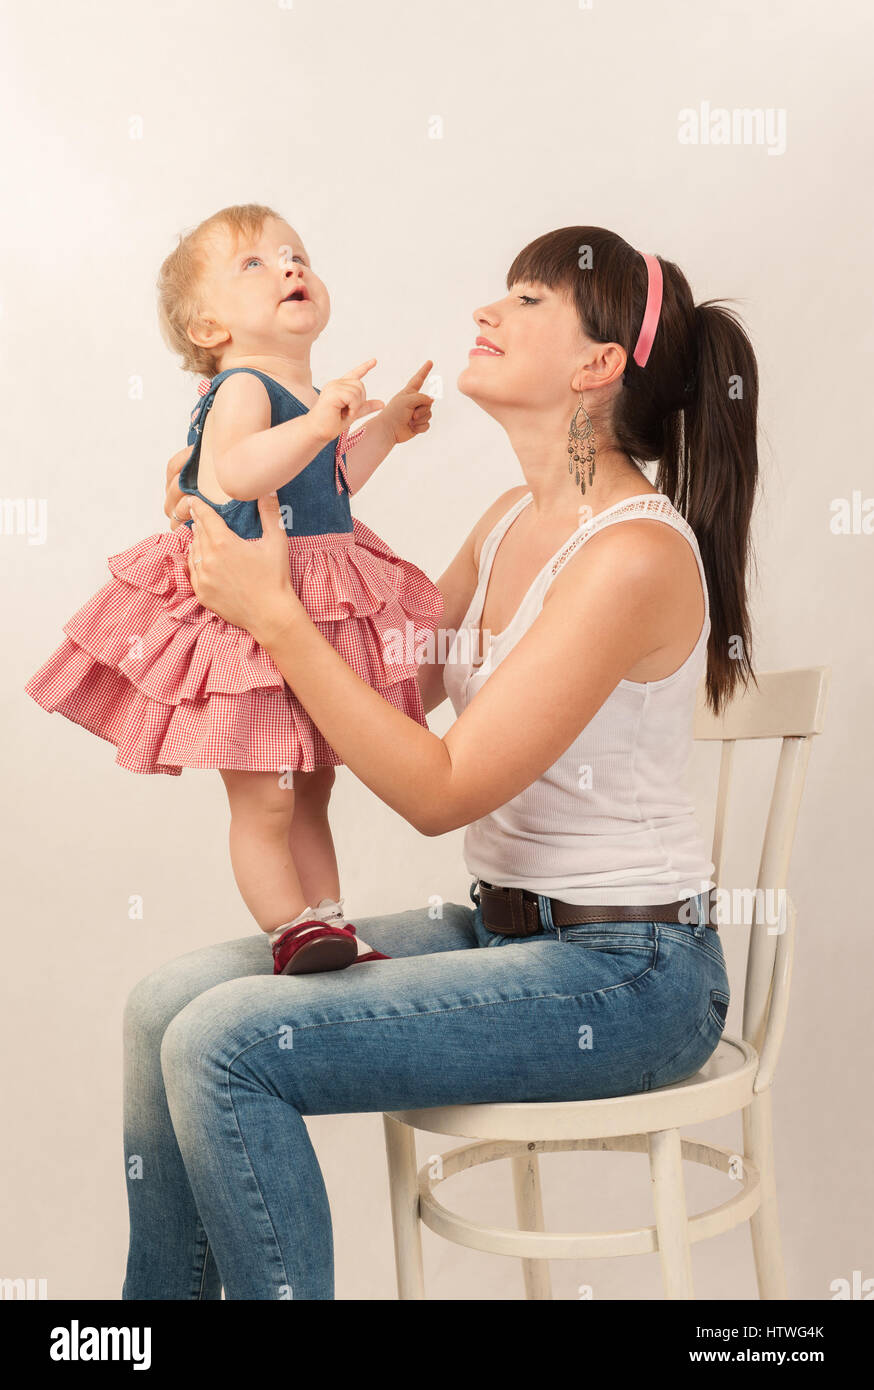 young happy mother with baby daughter in retro toning Stock Photo